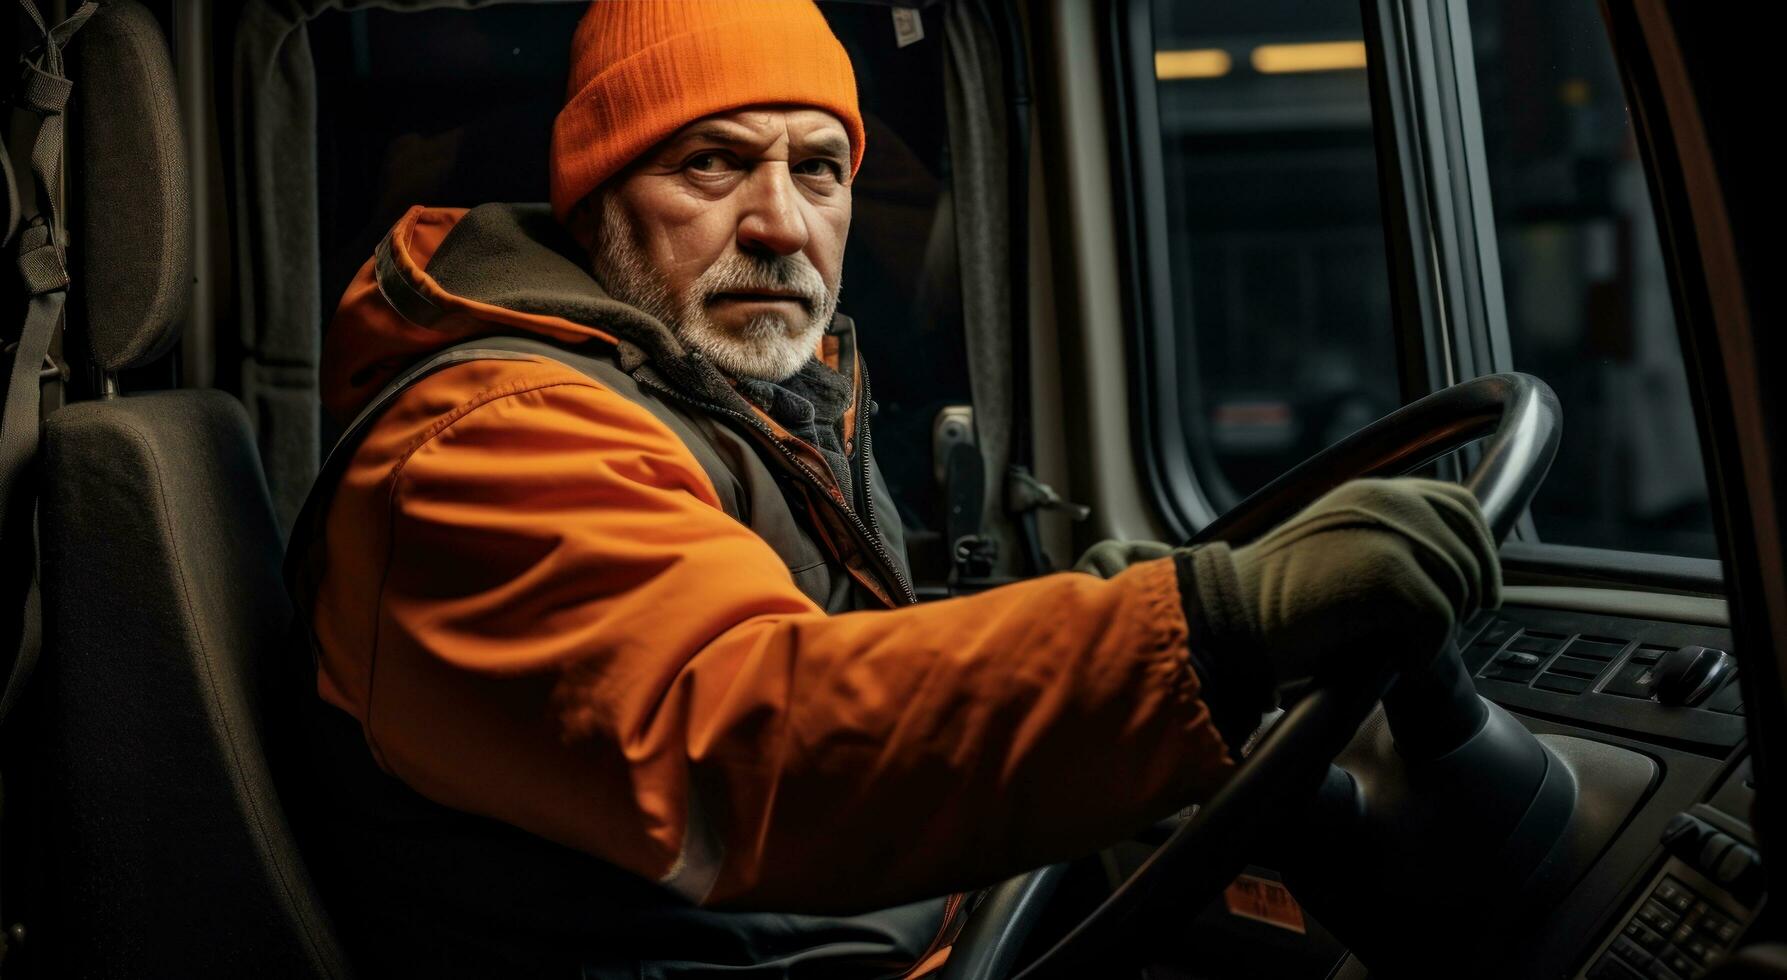 A truck driver is driving a truck with an orange vest photo